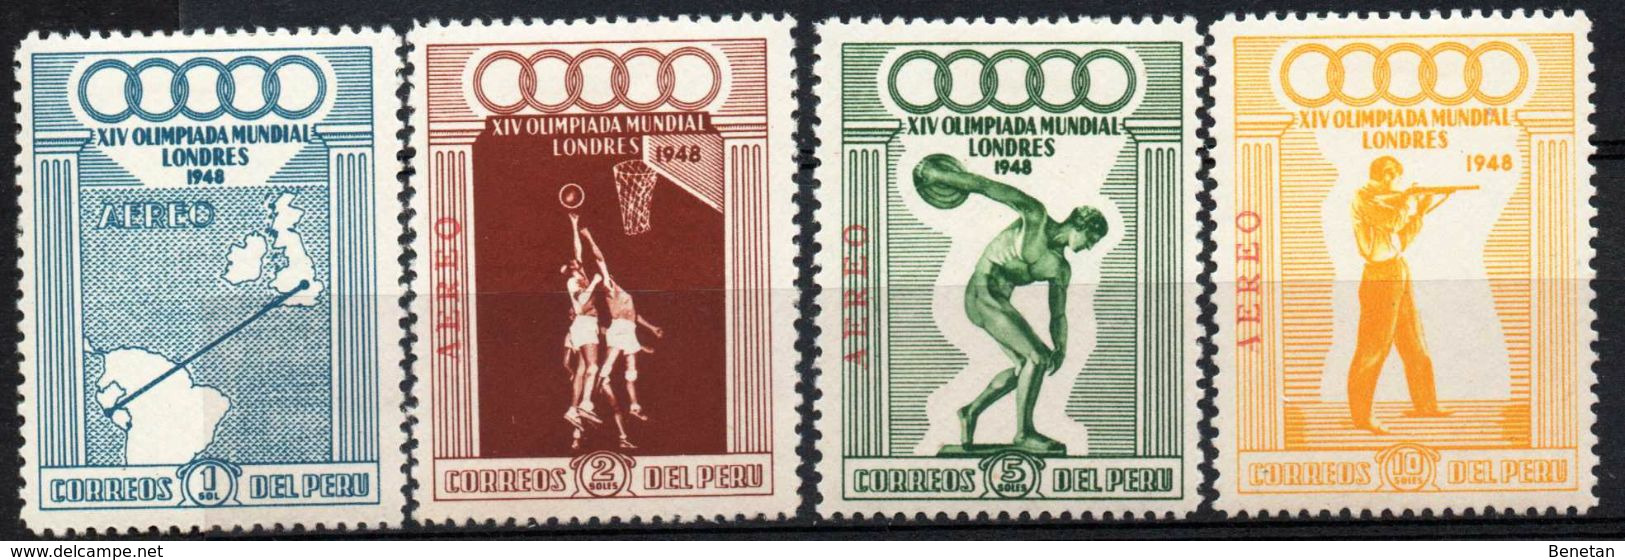 Olympic Games London 1948 PERU Yv# A71/4 Complete Set MH - Verano 1948: Londres